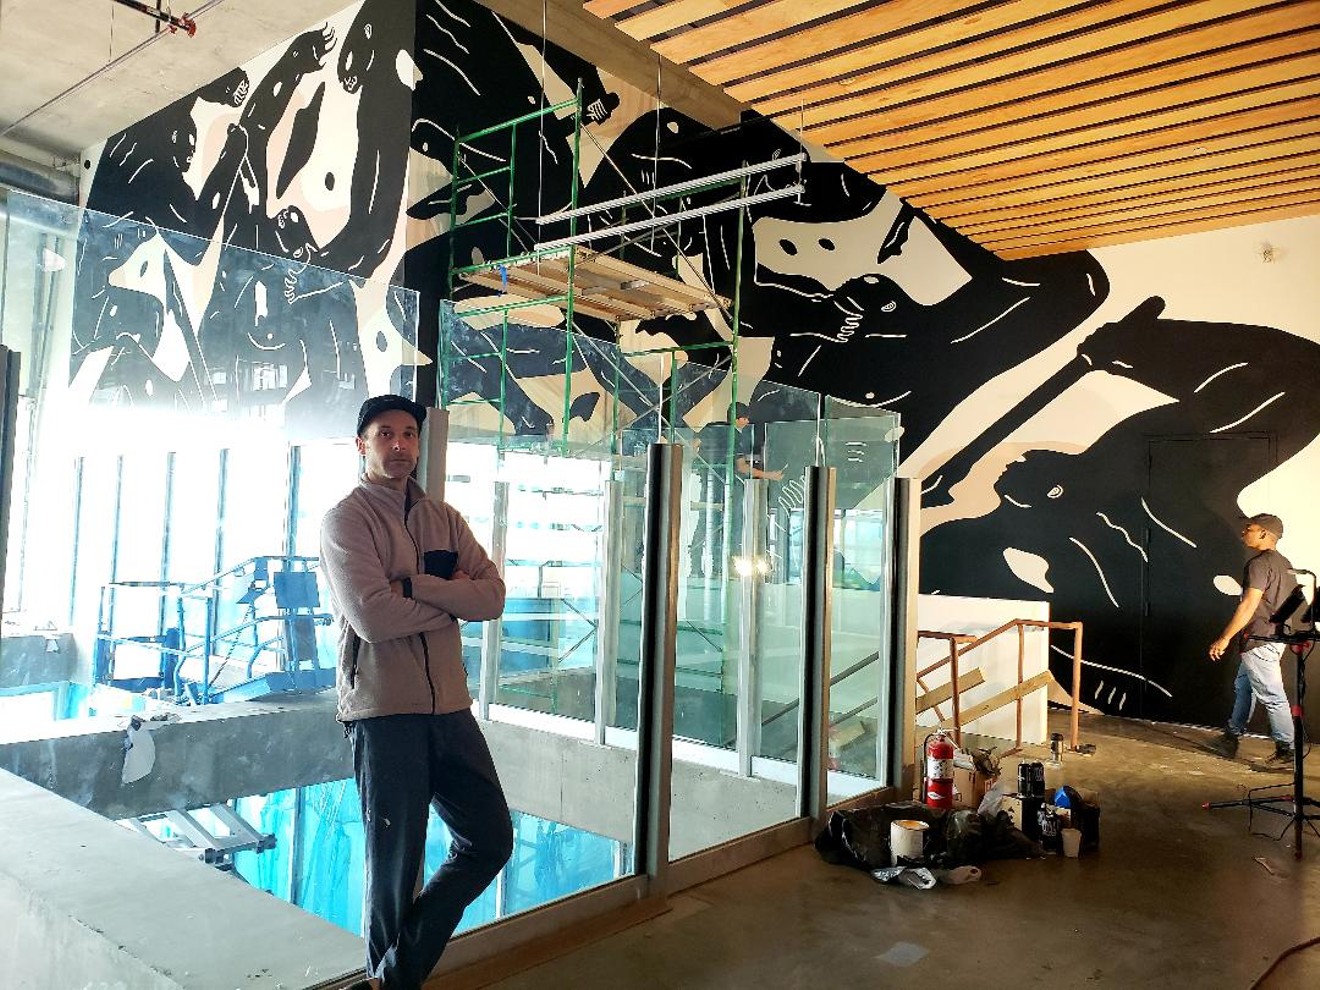 Cleon Peterson in front of his completed mural in the Source Hotel and Market Hall.